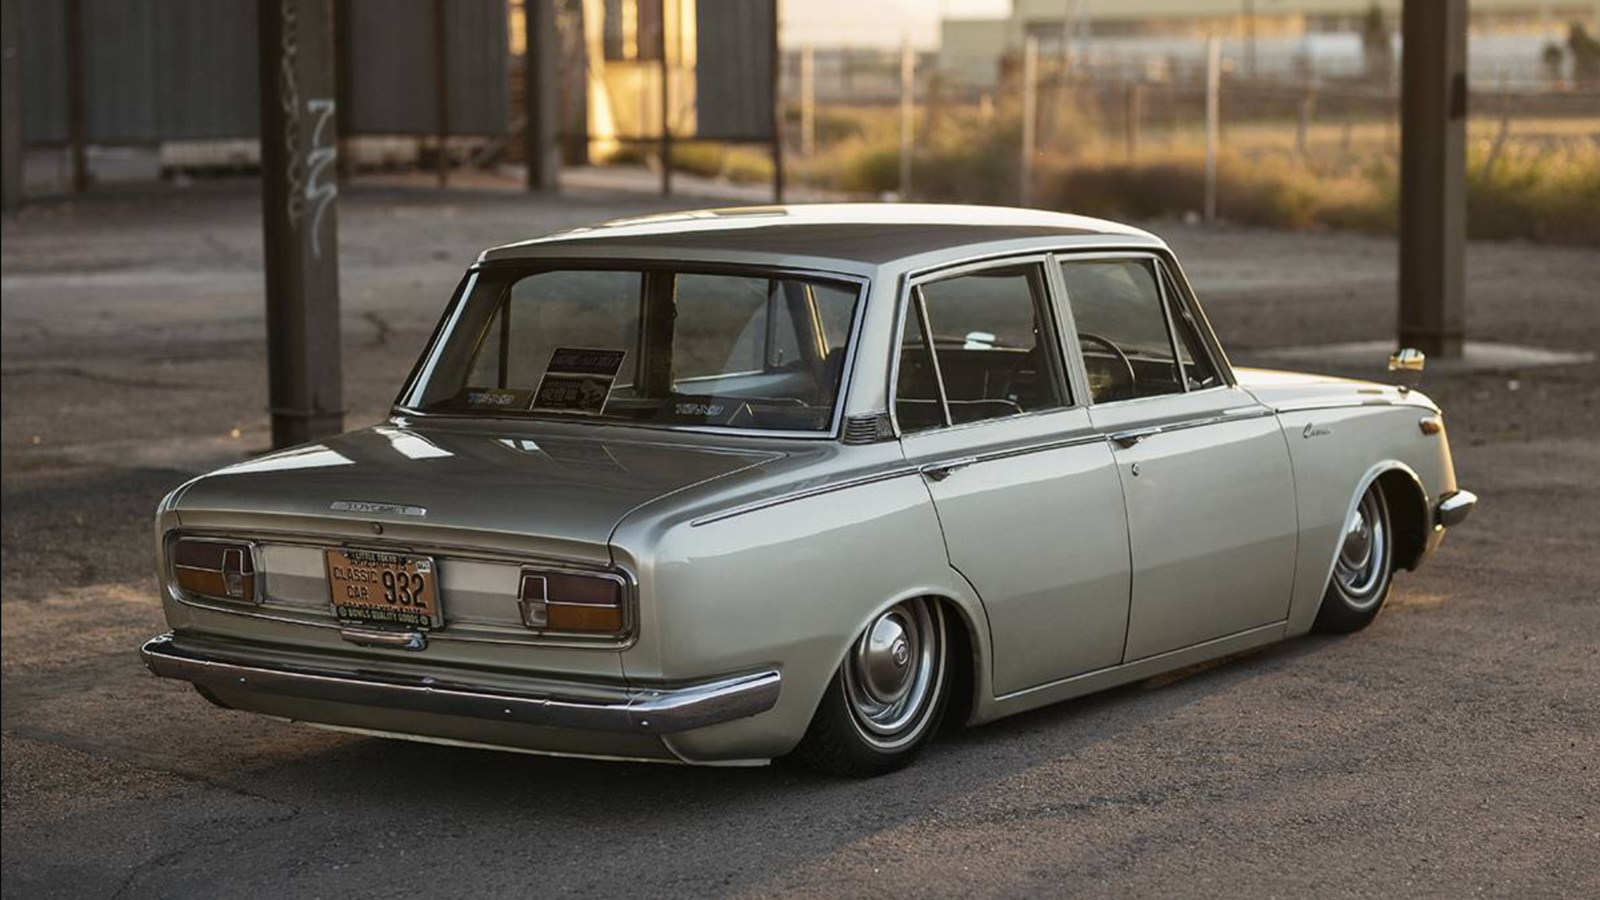 This 1968 Toyota Corona For Sale In Arizona Is The Only Good Stanced Car